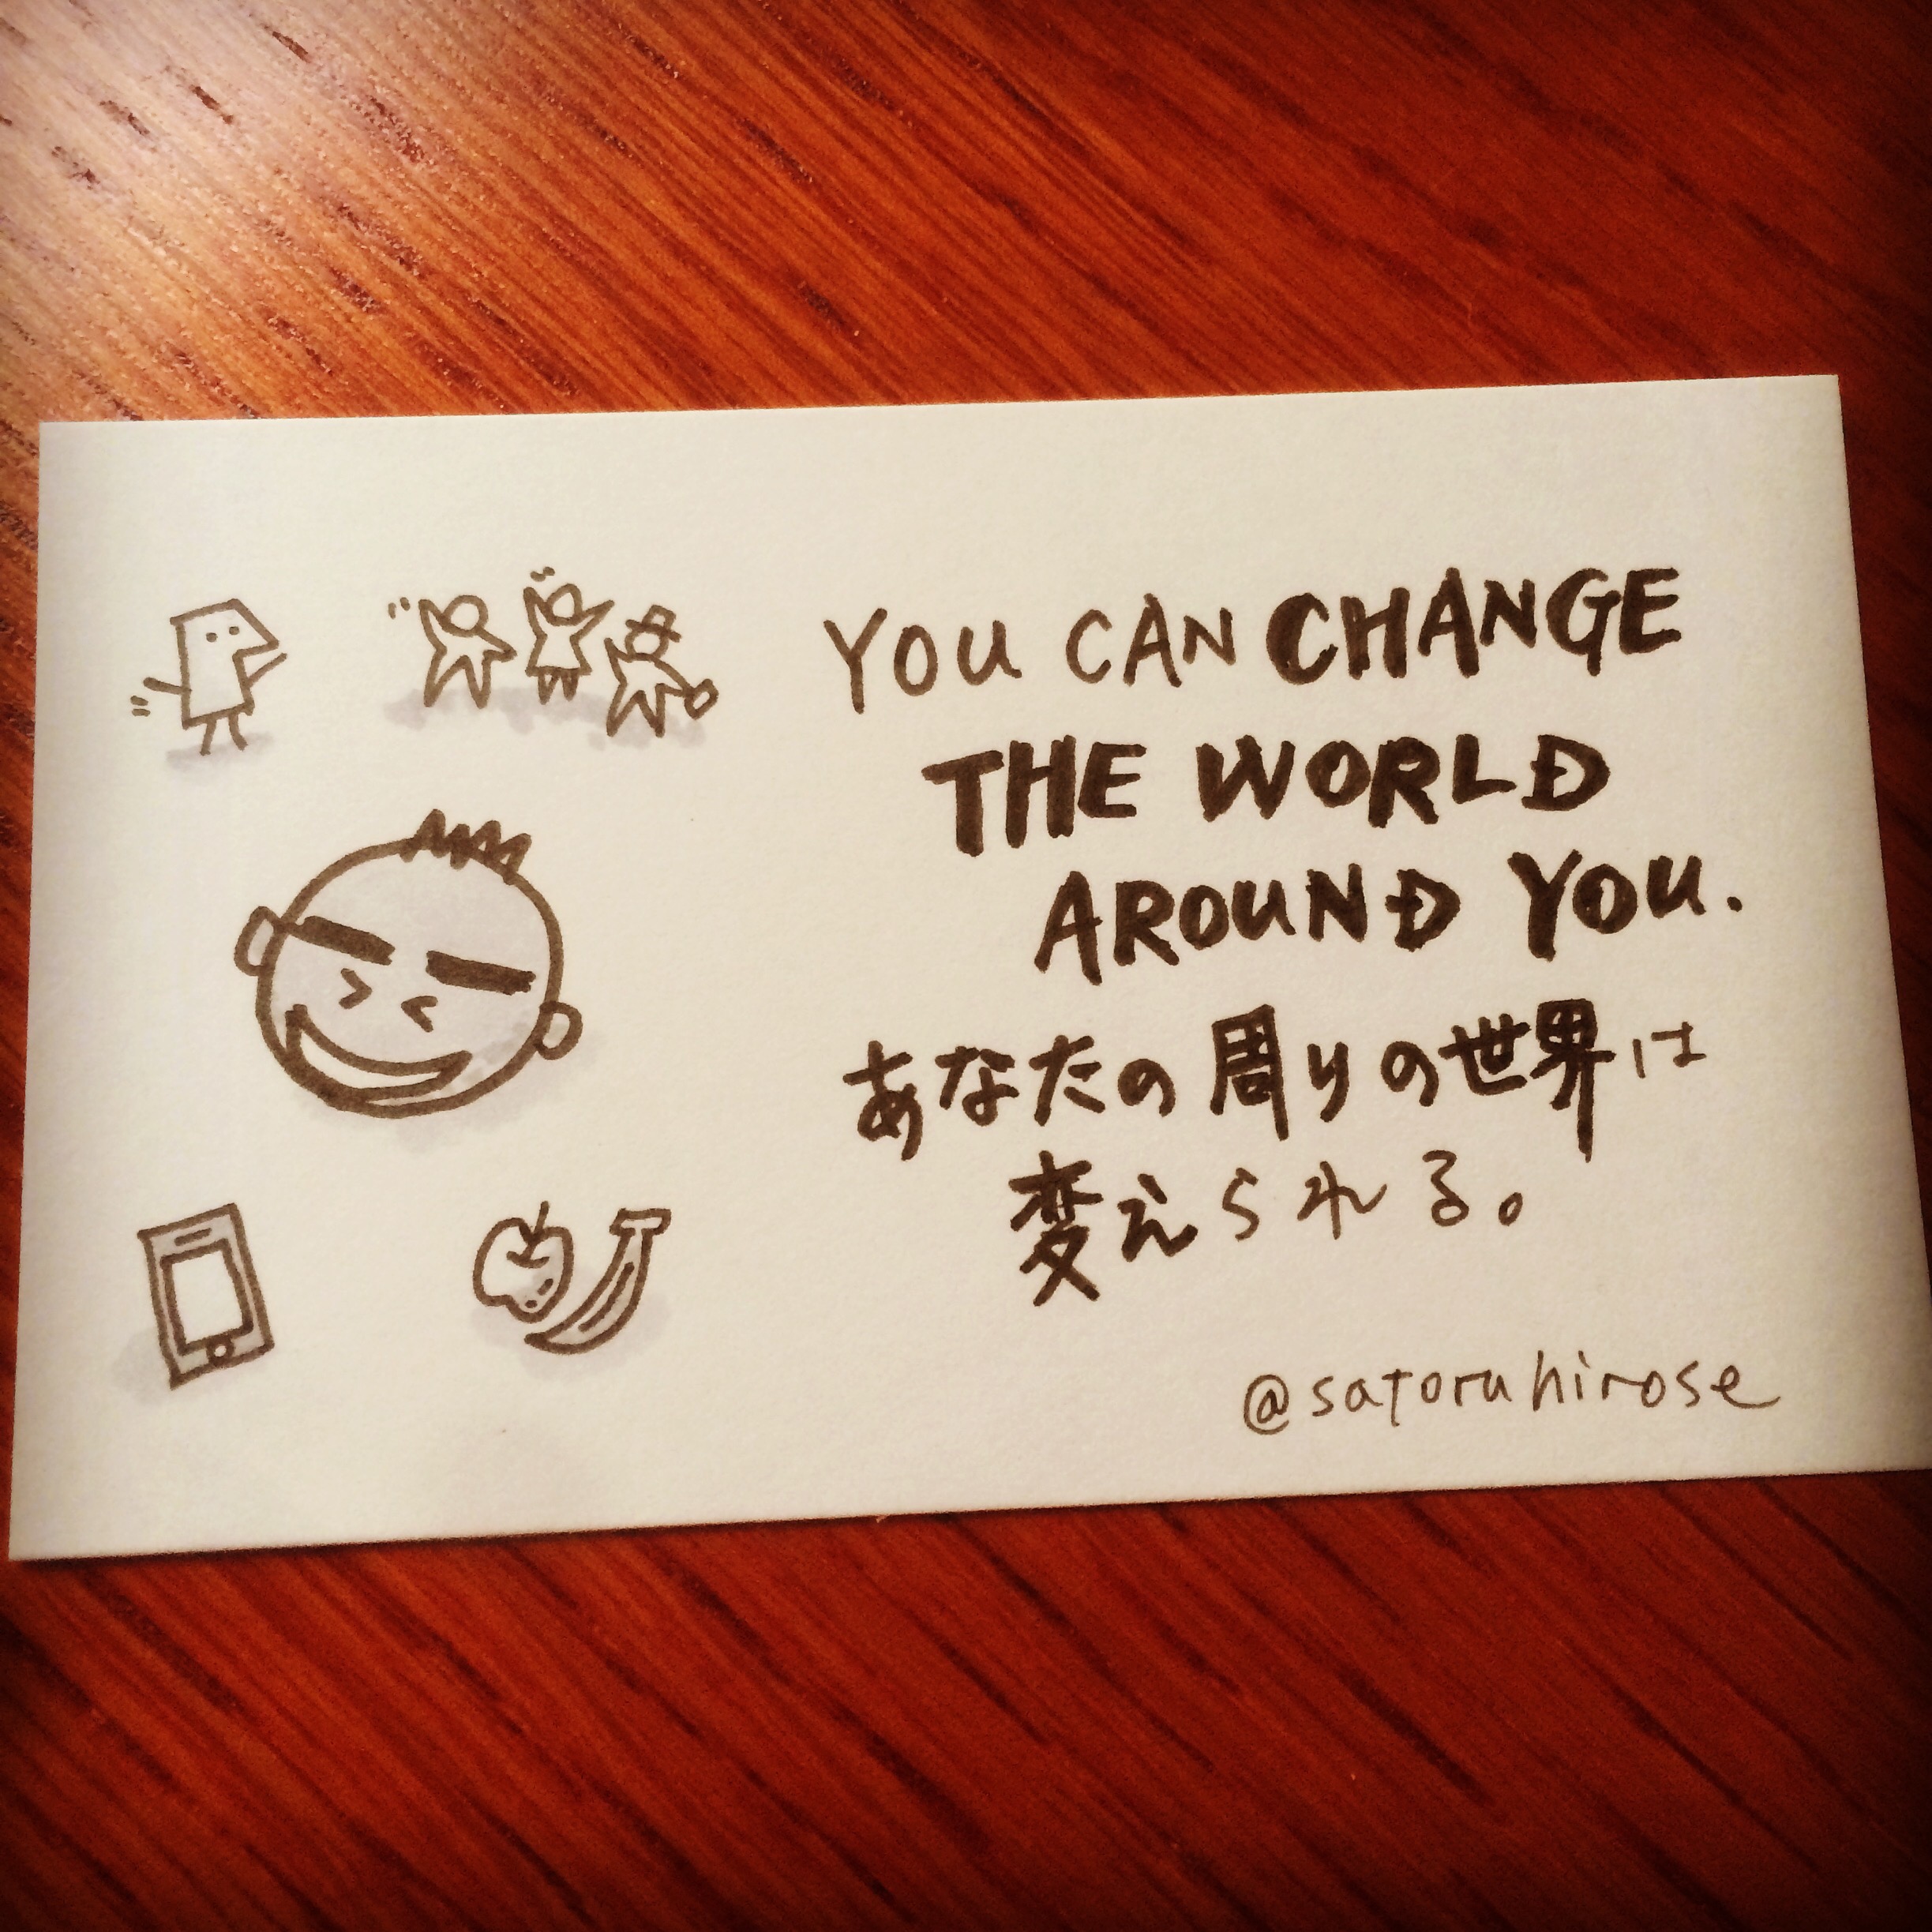 You can change the world around you.